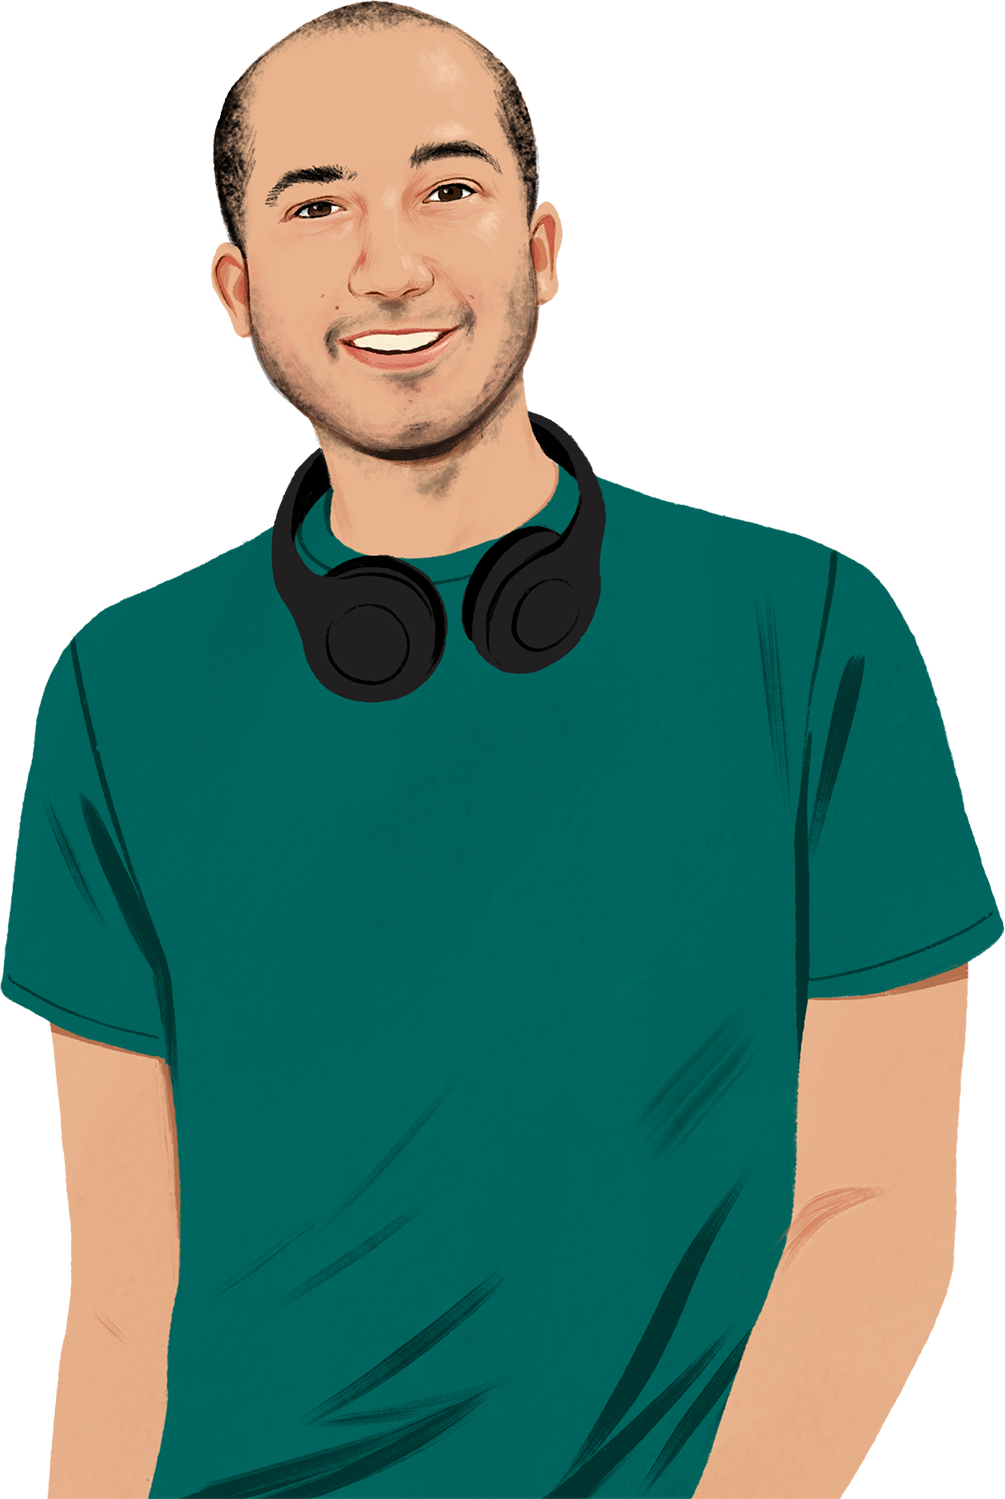 Illustrated portrait of Chris smiling, wearing headphones around his neck and looking at the reader; an illustrated iPhone enters the frame, emitting visible sound waves.